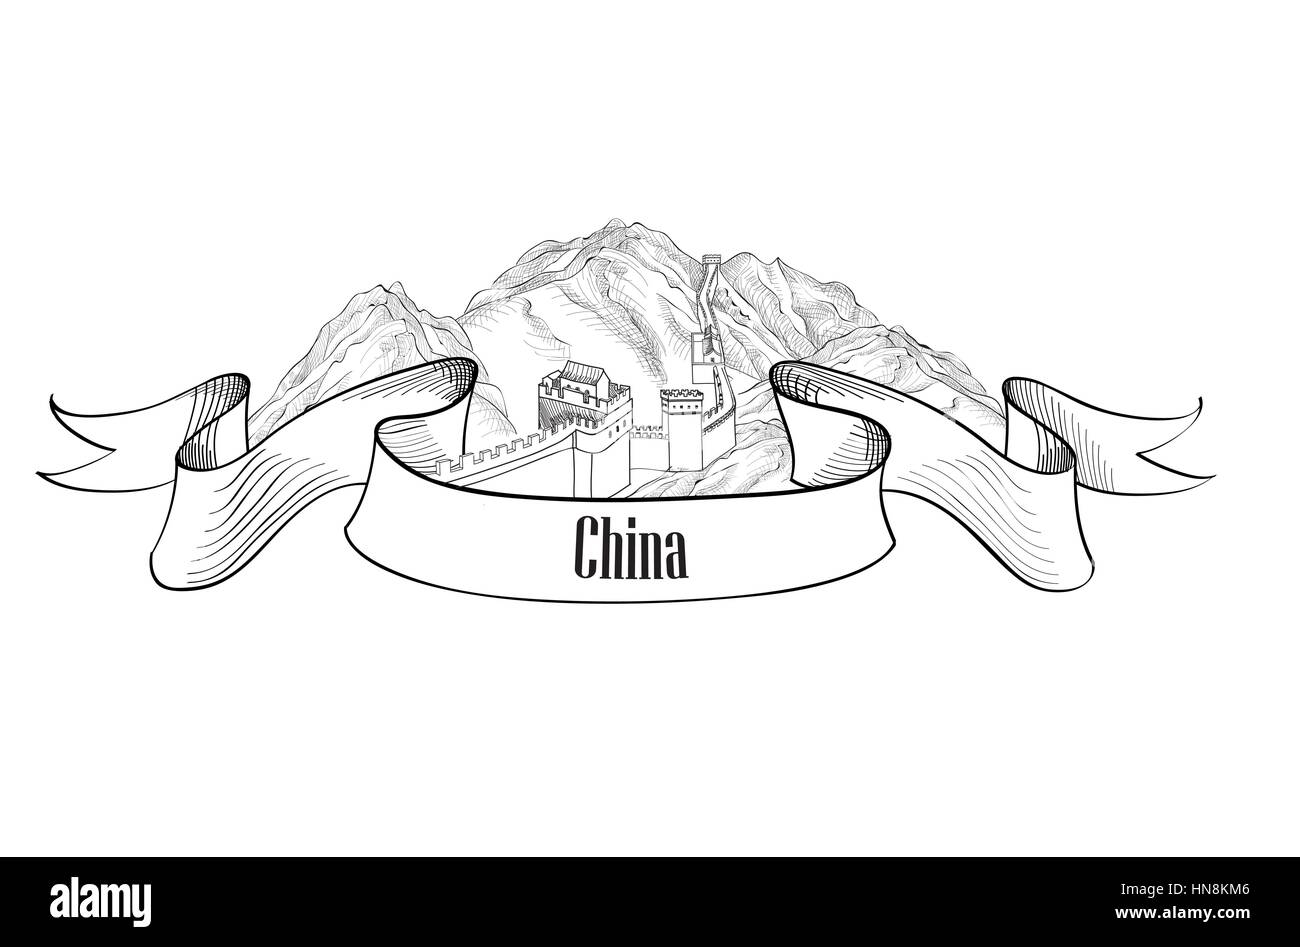 China label. Travel Asia label. The Great Wall of China symbol sketch isolated. Stock Vector